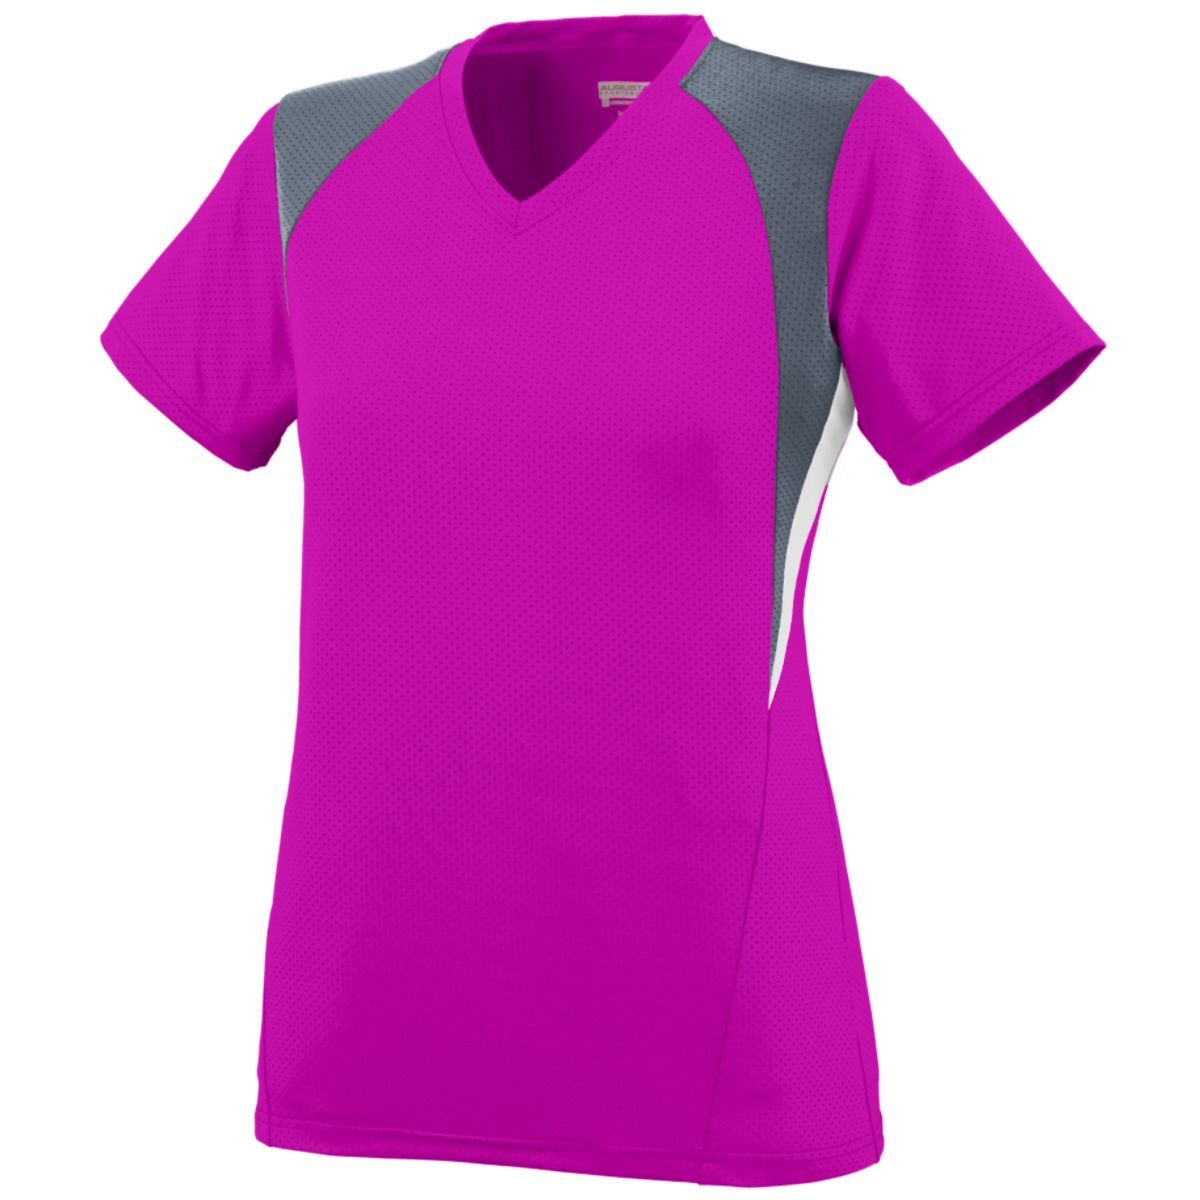 Augusta Sportswear Ladies Mystic Jersey in Power Pink/Graphite/White  -Part of the Ladies, Ladies-Jersey, Augusta-Products, Soccer, Shirts, All-Sports-1 product lines at KanaleyCreations.com